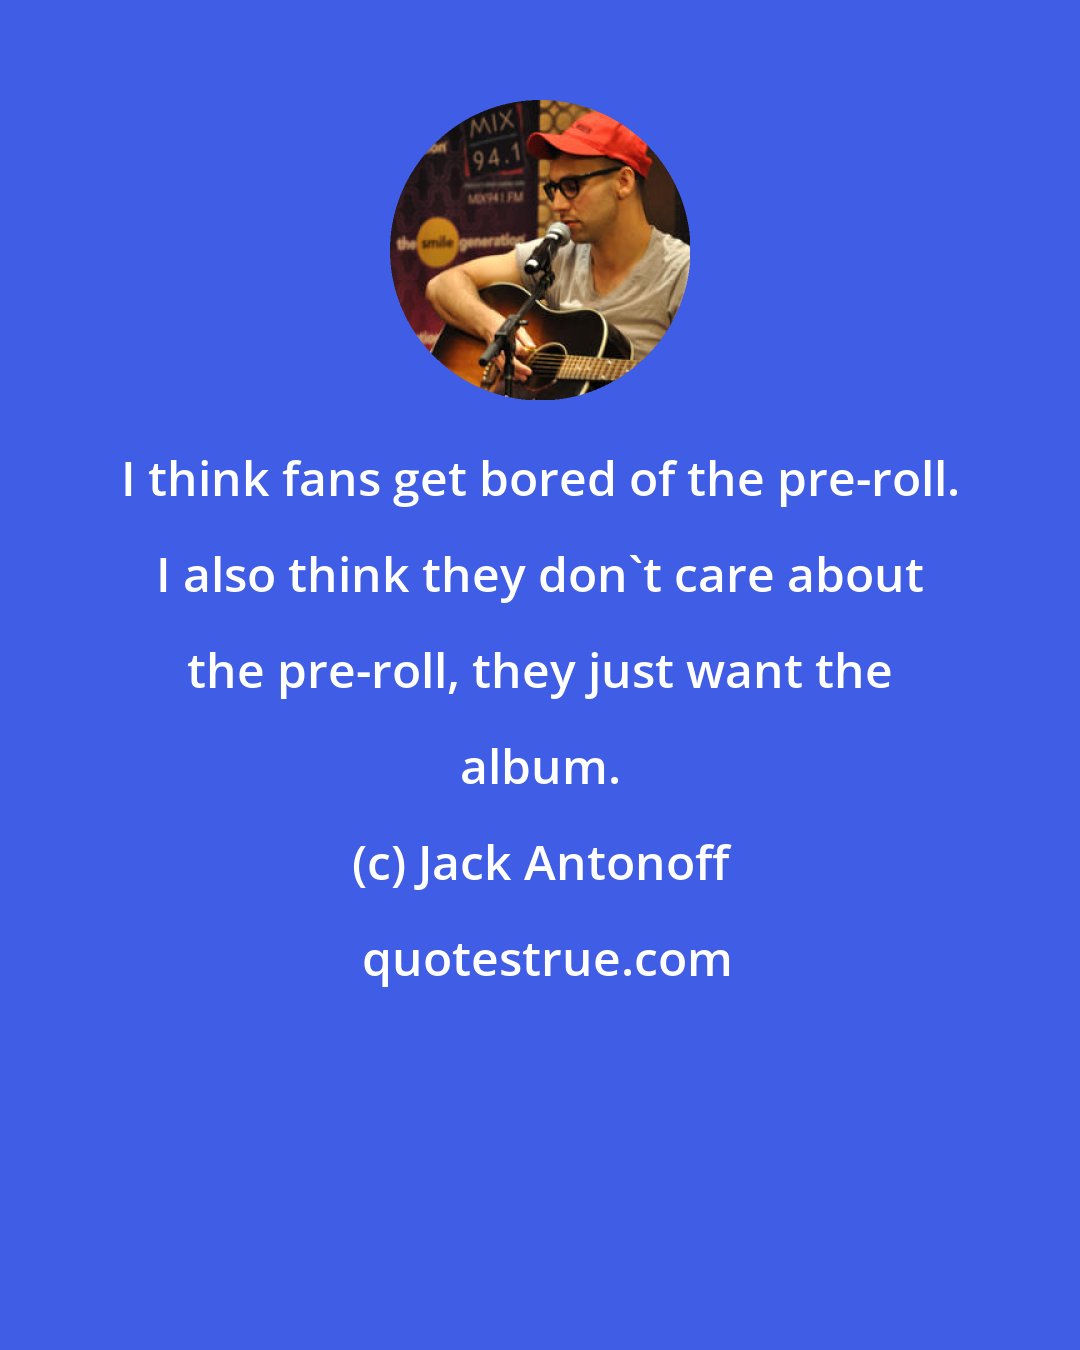 Jack Antonoff: I think fans get bored of the pre-roll. I also think they don't care about the pre-roll, they just want the album.